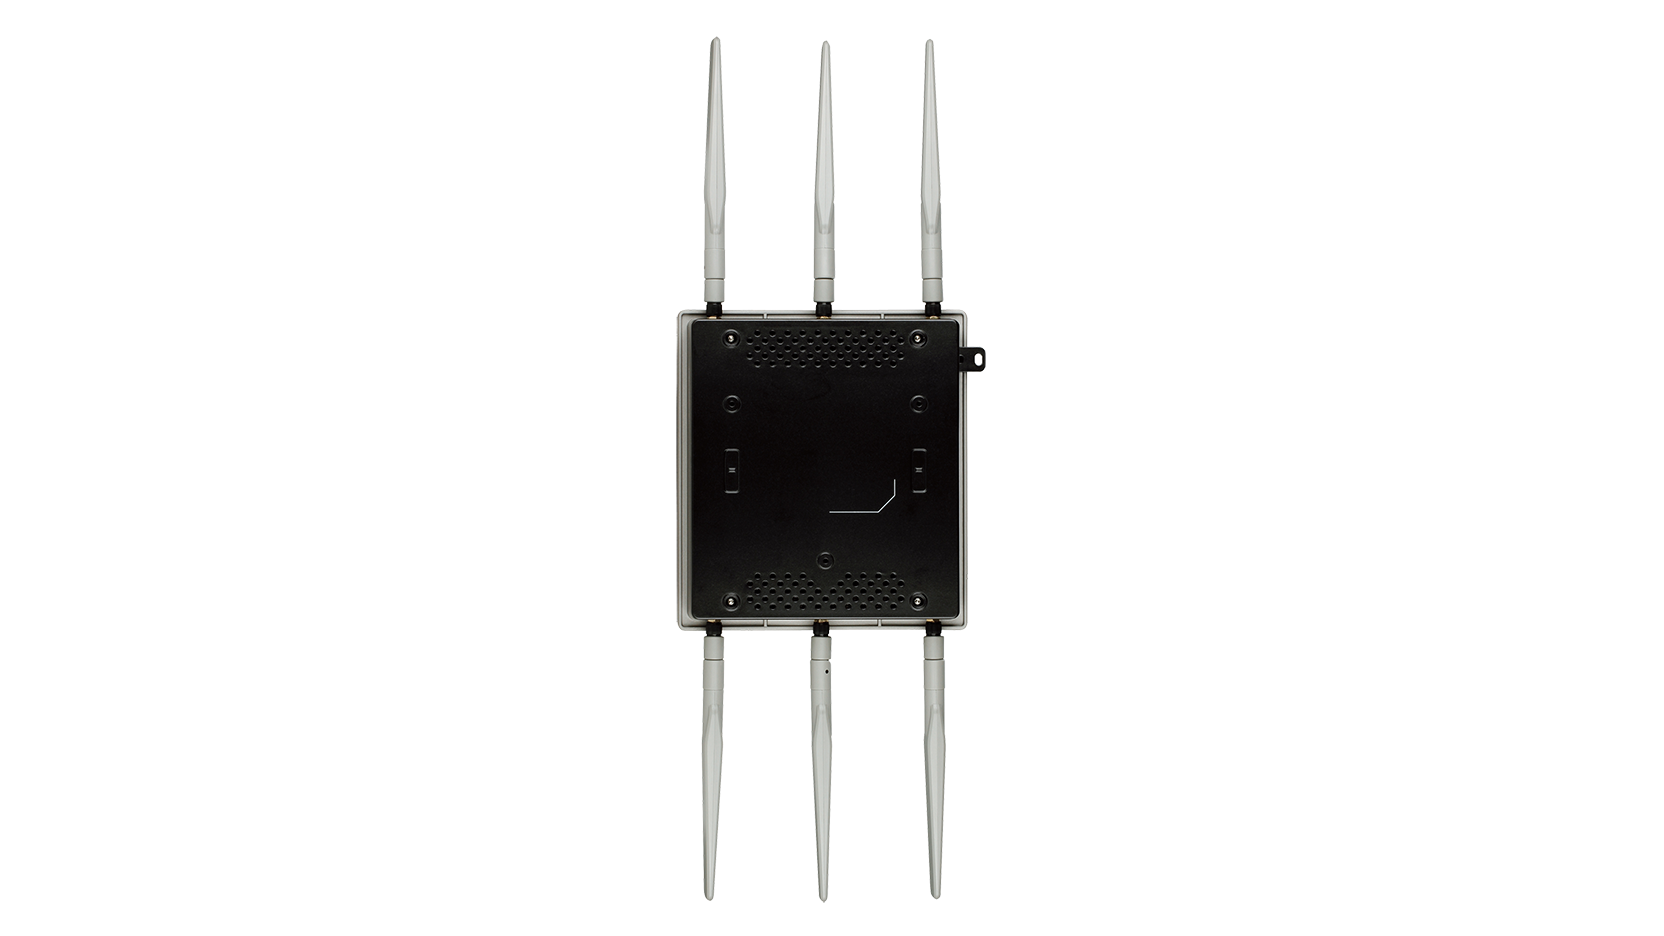 Wireless AC1750 Simultaneous Dual-Band PoE Access Point